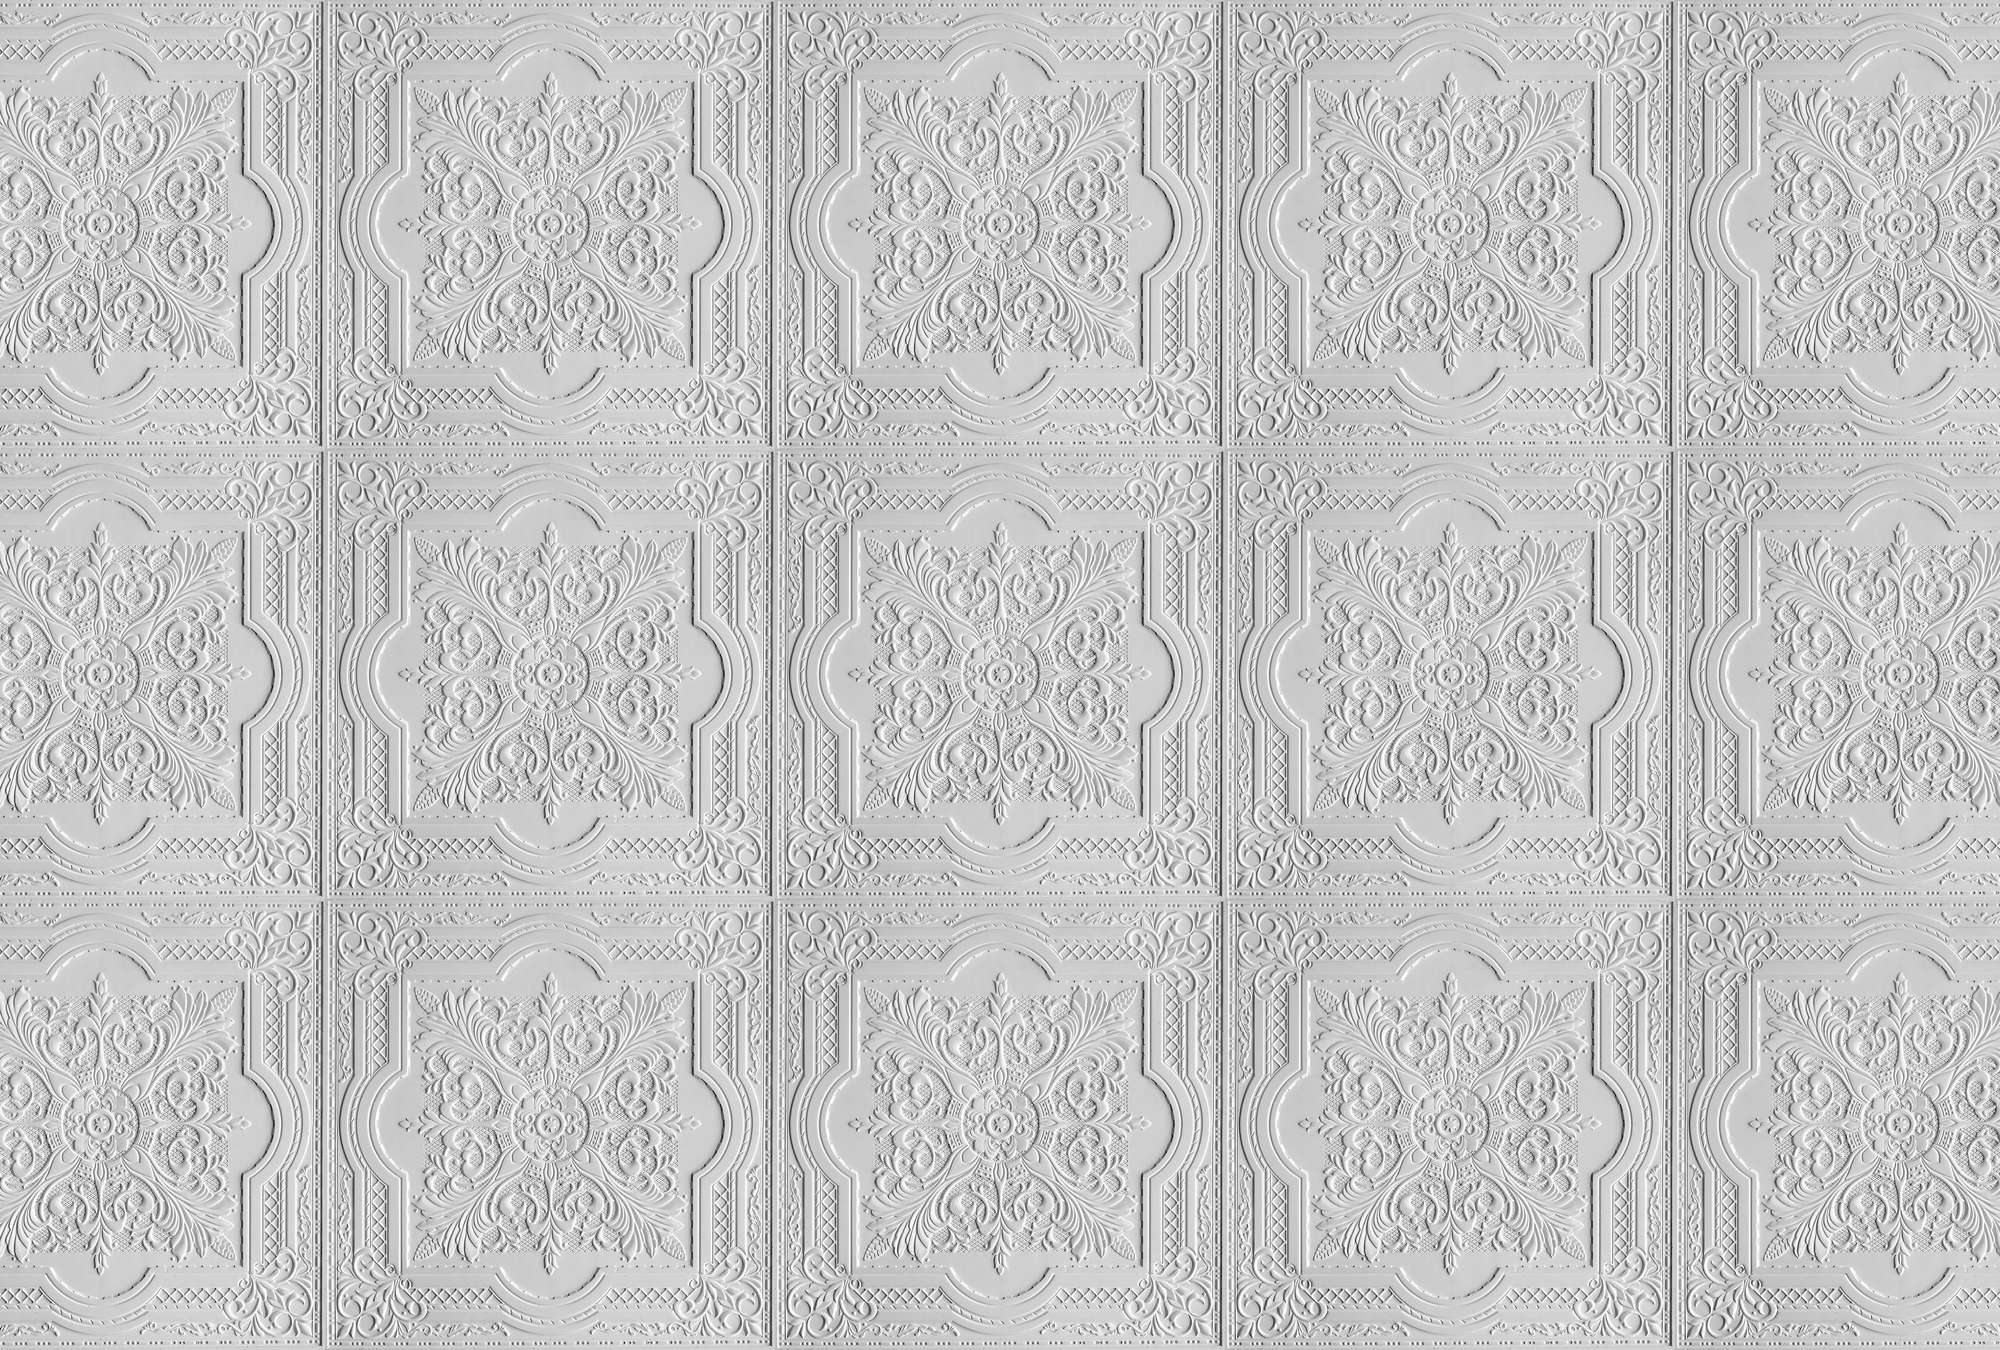             Photo wallpaper ceiling with print pattern - white
        